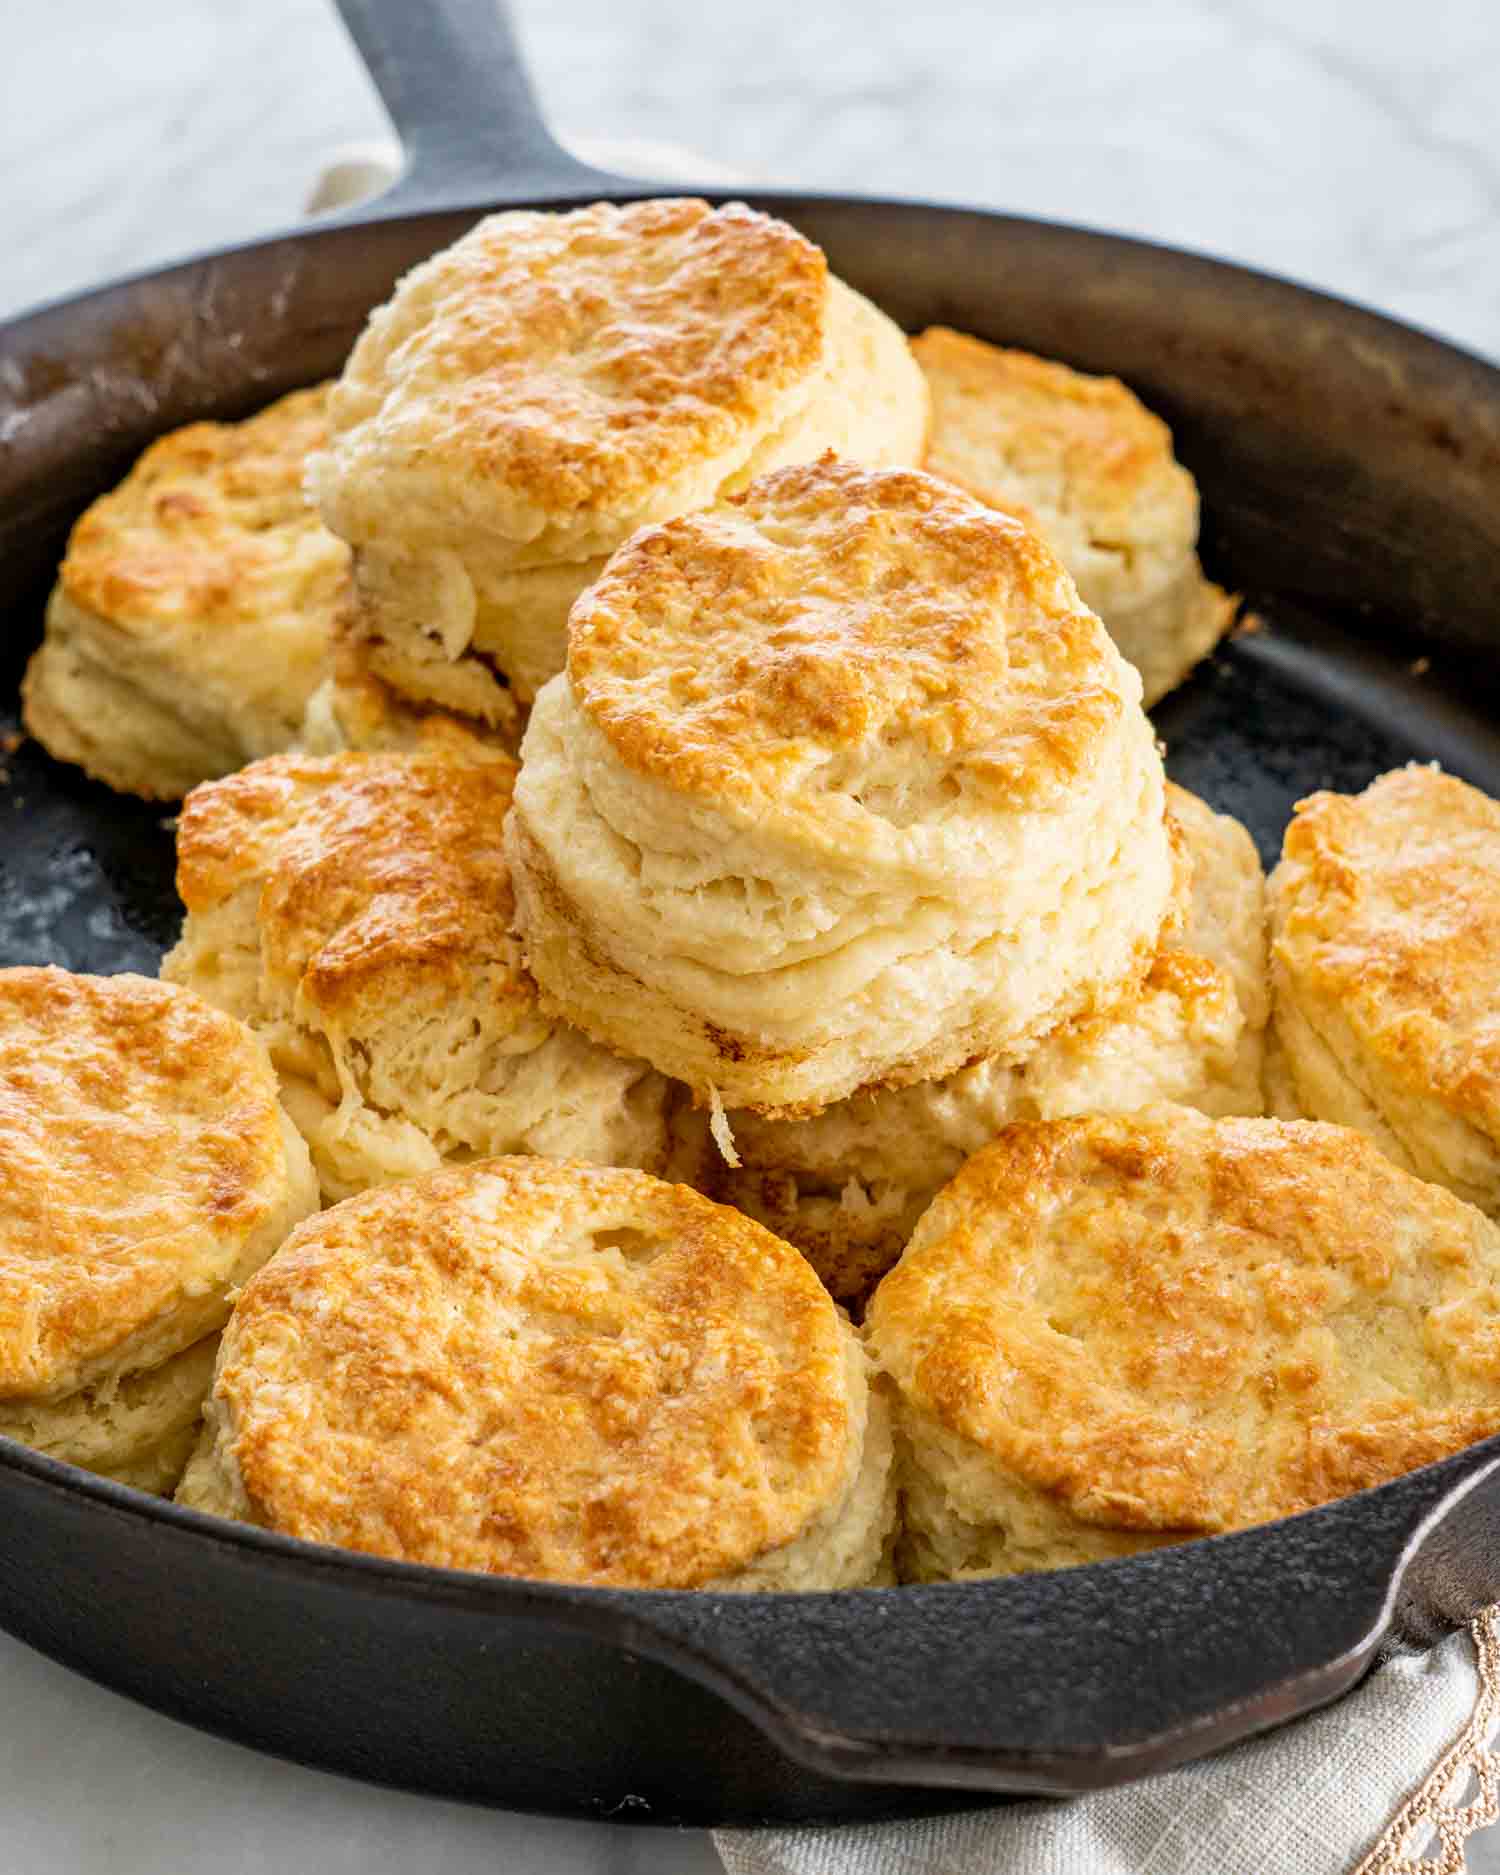 buttermilk biscuits freshly baked in a cast iron skillet.